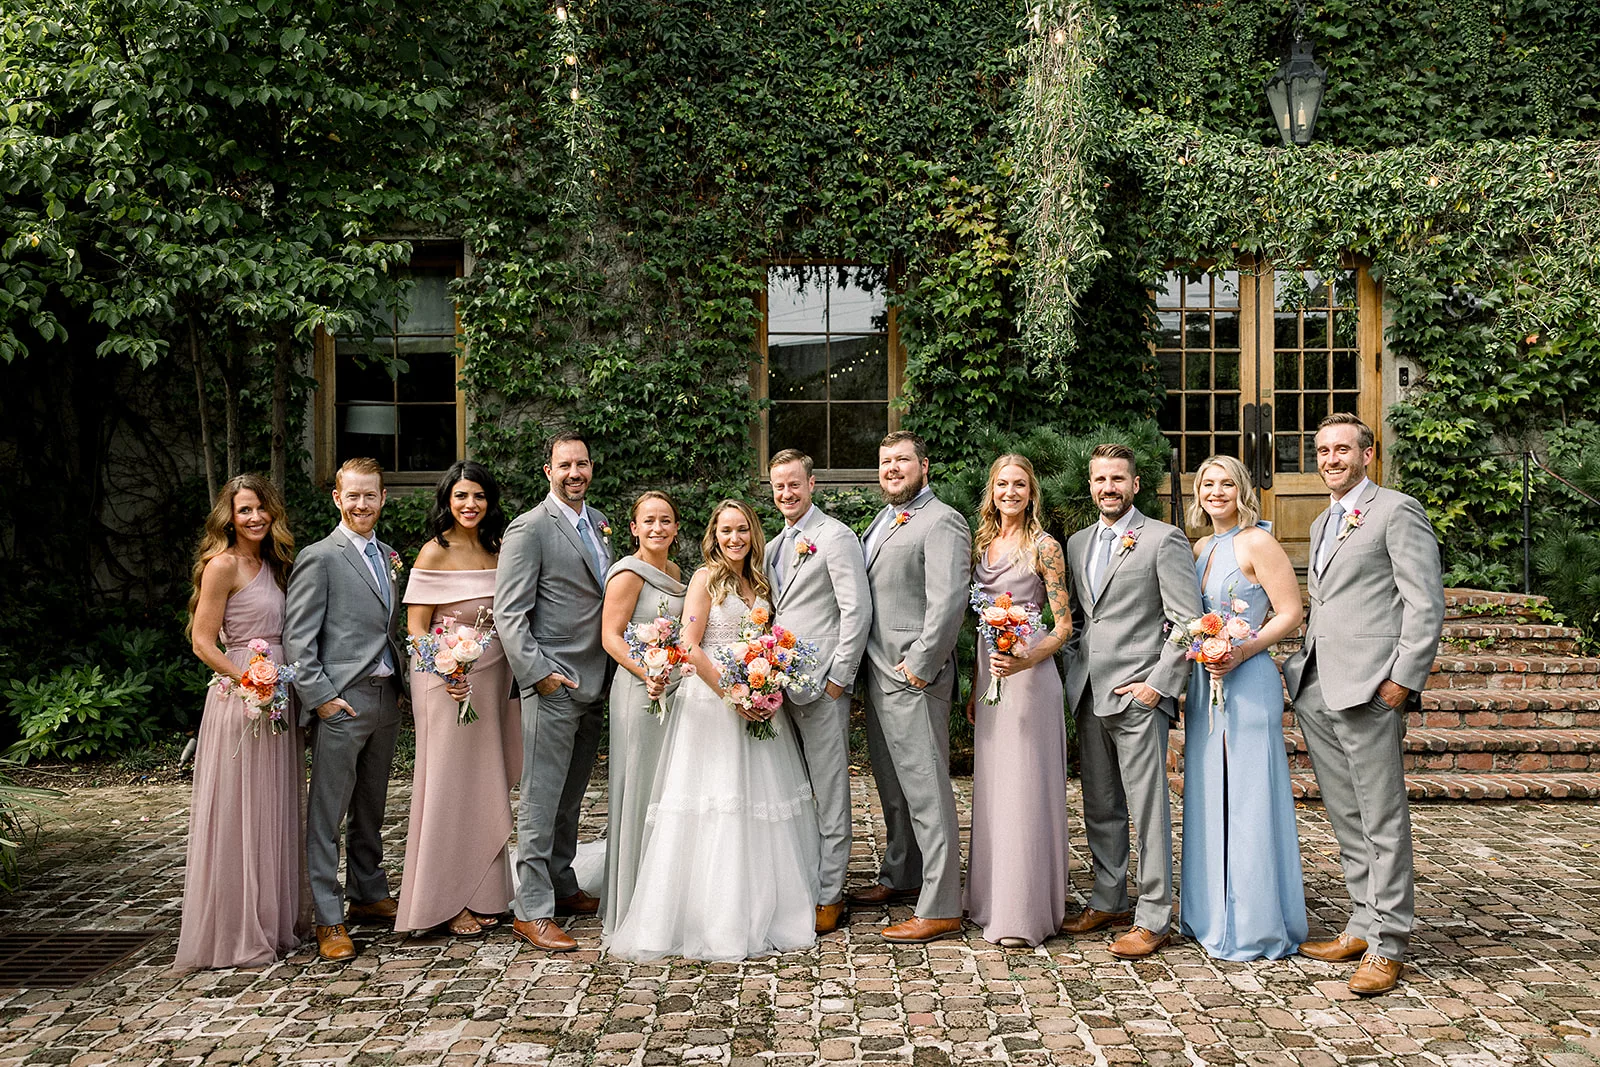 A wedding party stands on either side of newlyweds on a brick patio of an ivy covered building at a Summerour Studio Wedding